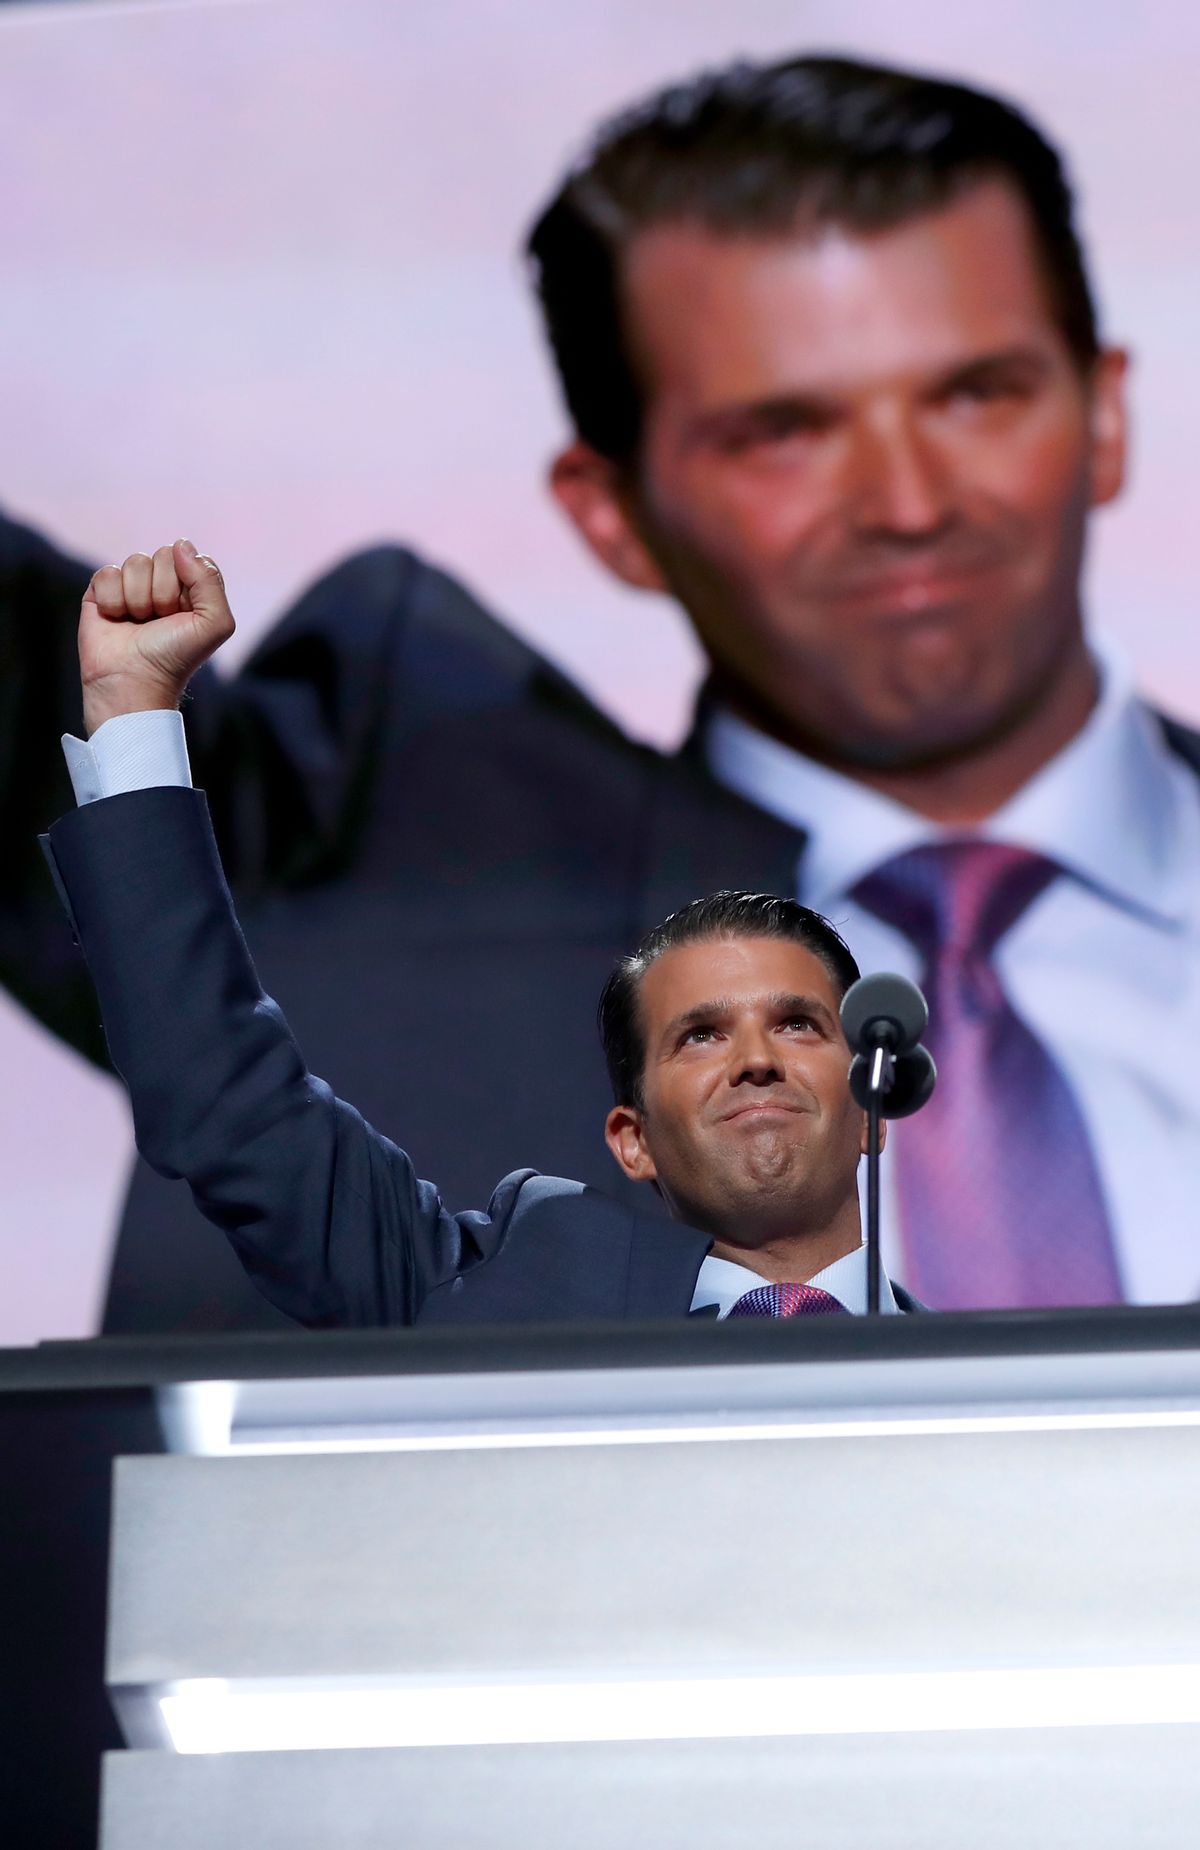 Donald Trump, Jr., son of Republican Presidential Candidate Donald Trump, speaks during the second day session of the Republican National Convention in Cleveland, Tuesday, July 19, 2016. (AP Photo/Carolyn Kaster)